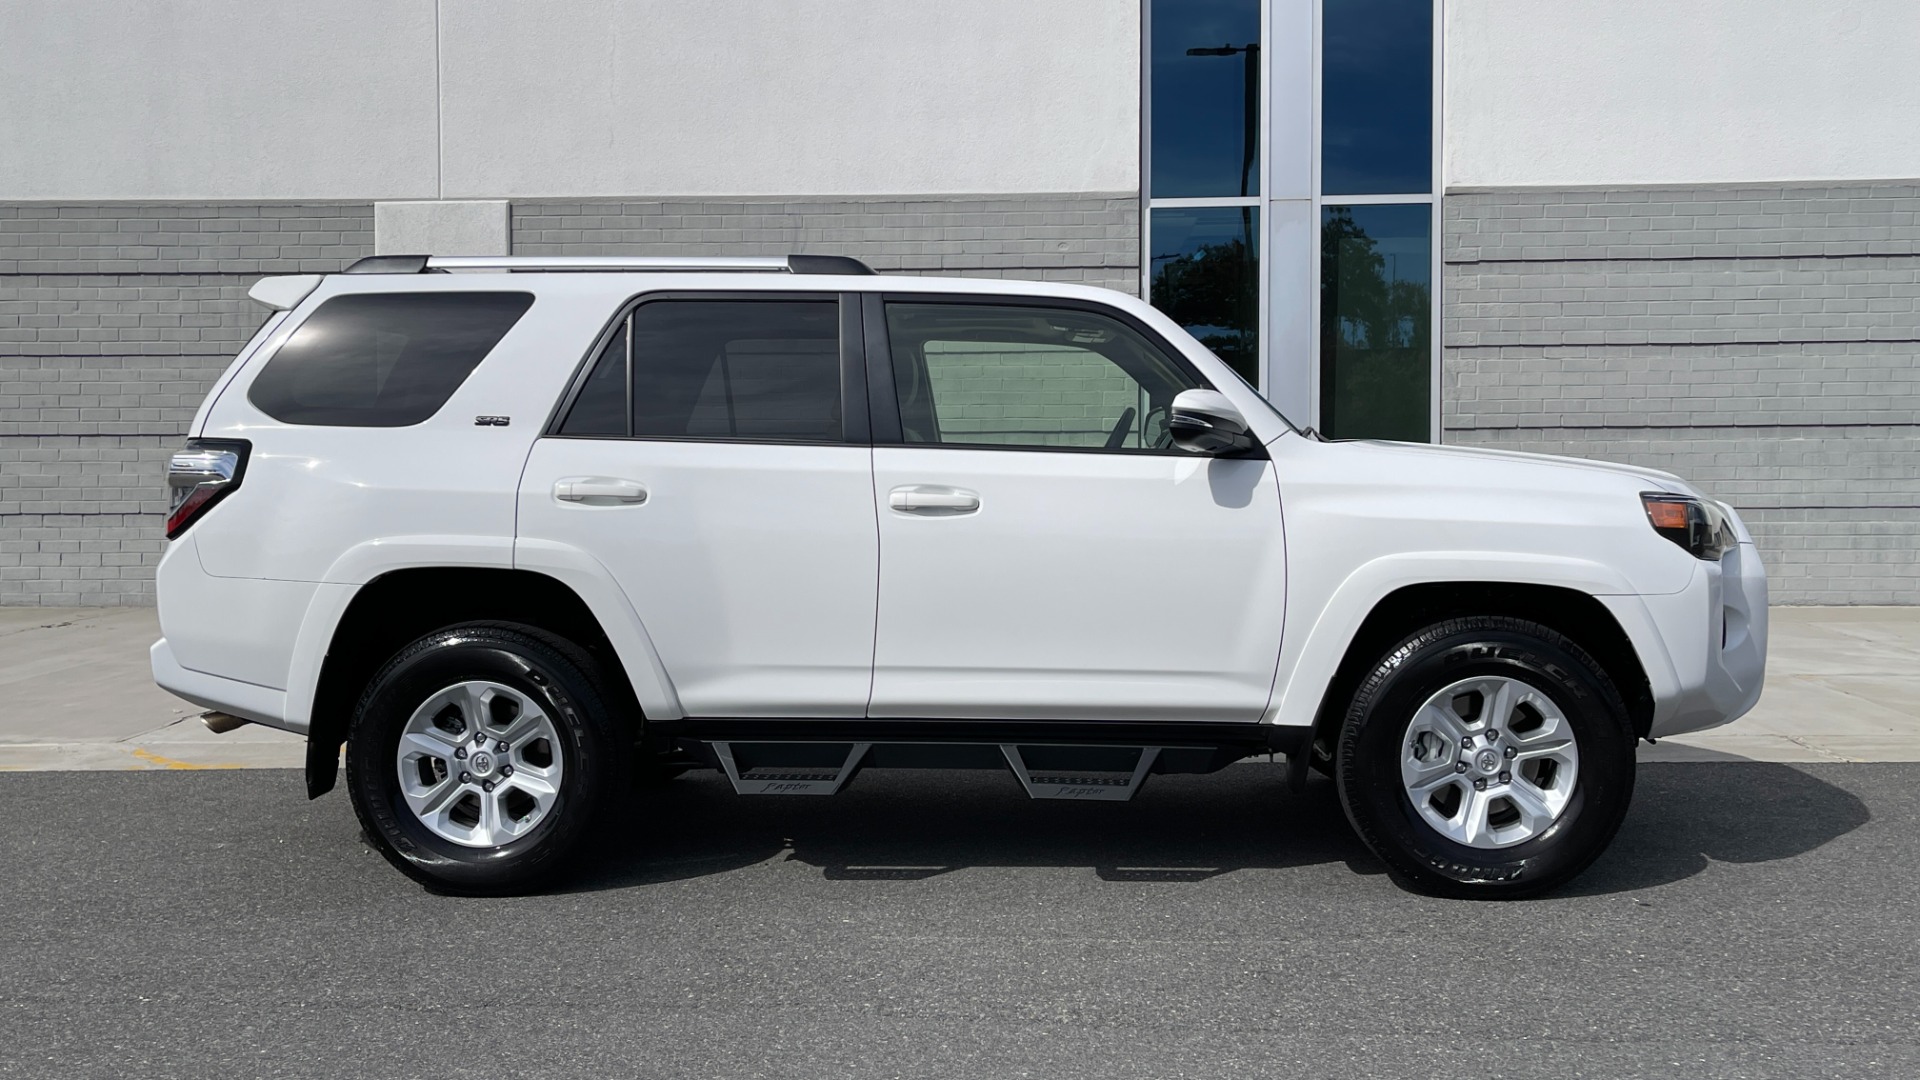 Used 2020 Toyota 4Runner SR5 PREMIUM / 4X4 / LEATHER / SUNROOF / LED INTERIOR for sale $40,995 at Formula Imports in Charlotte NC 28227 3